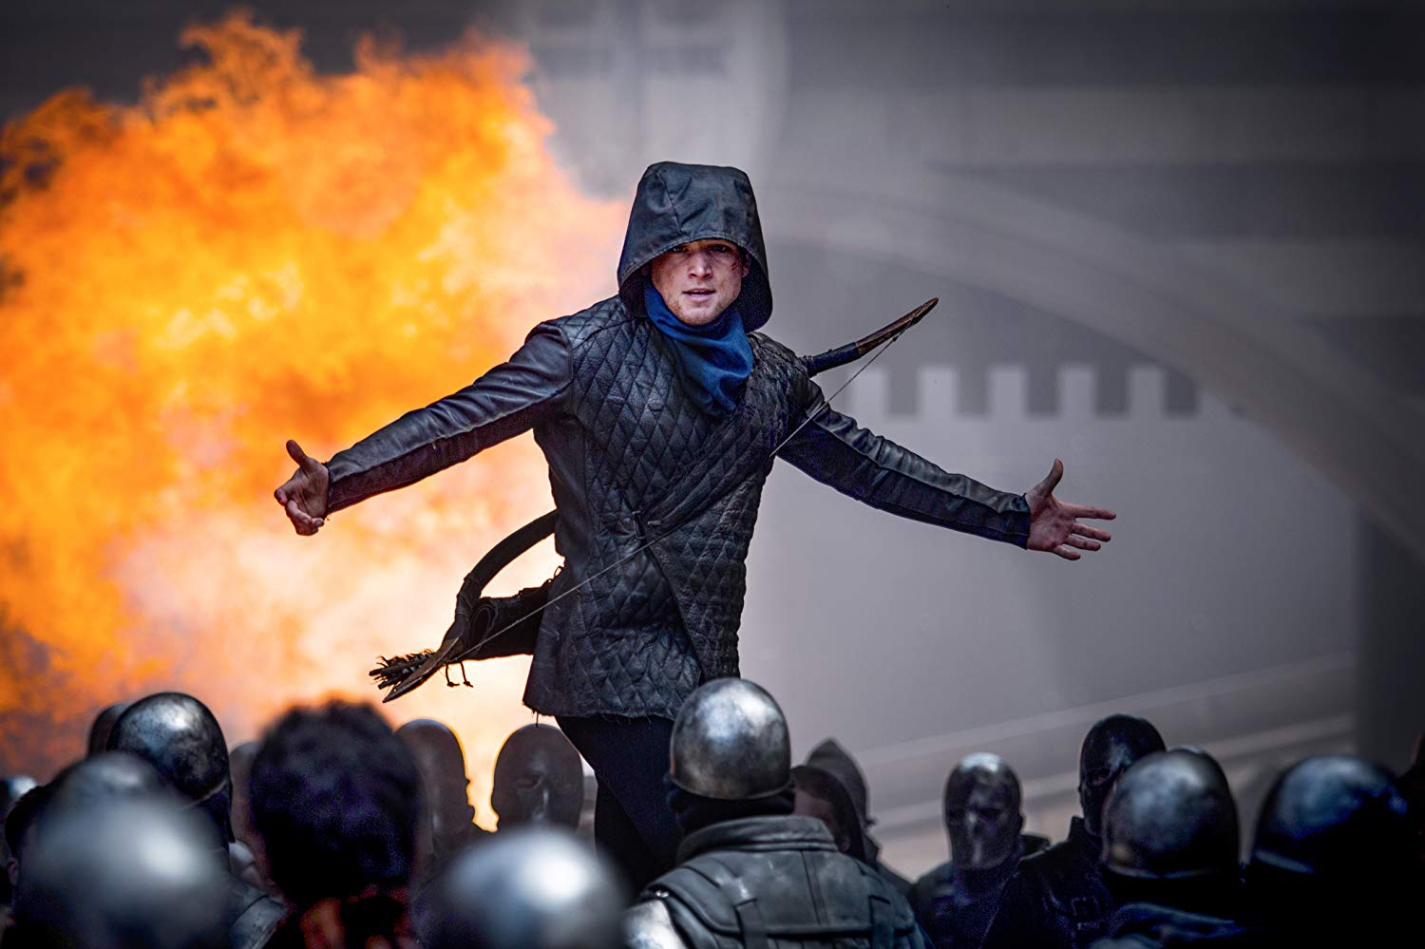 Taron Egerton, of the Kingsman films, struggles to overcome the bad script as the title character in the newest version of Robin Hood.